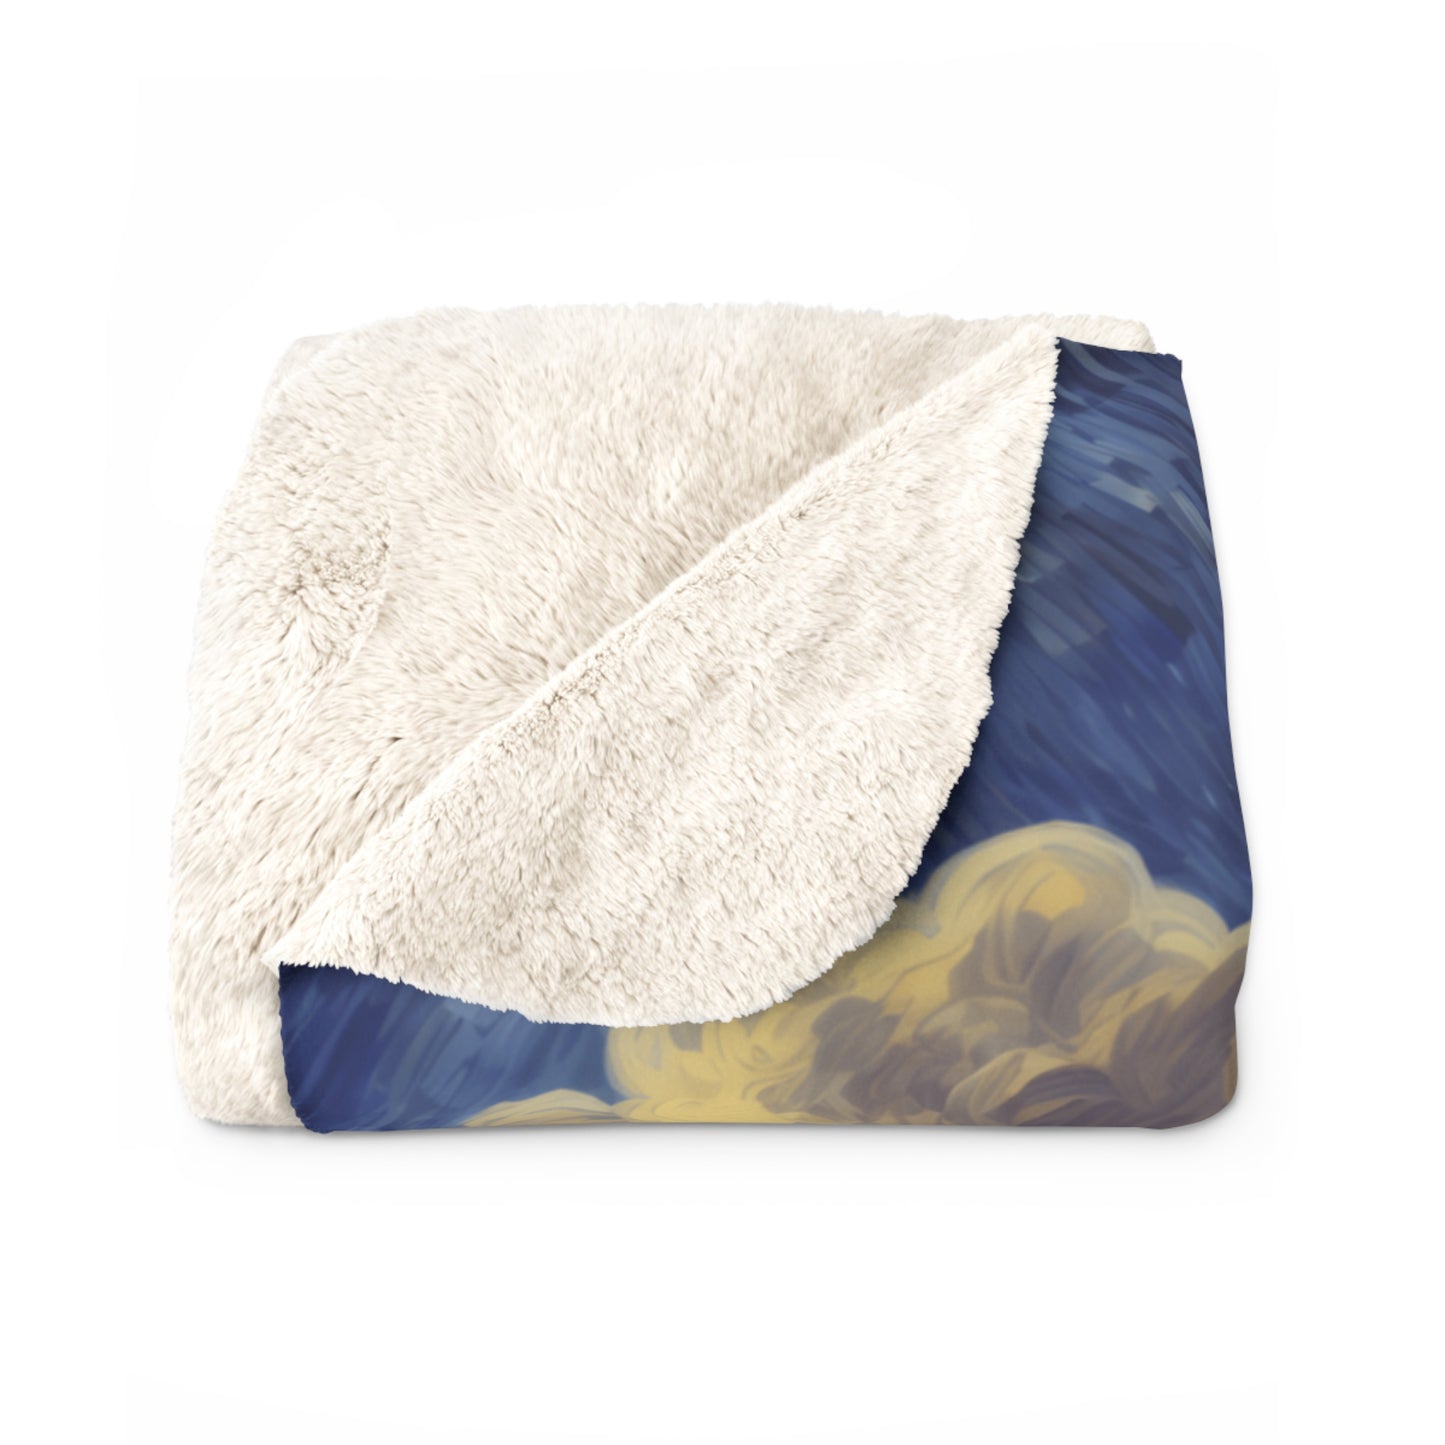 Capitol Reef National Park Sherpa Blanket - The Starry Night